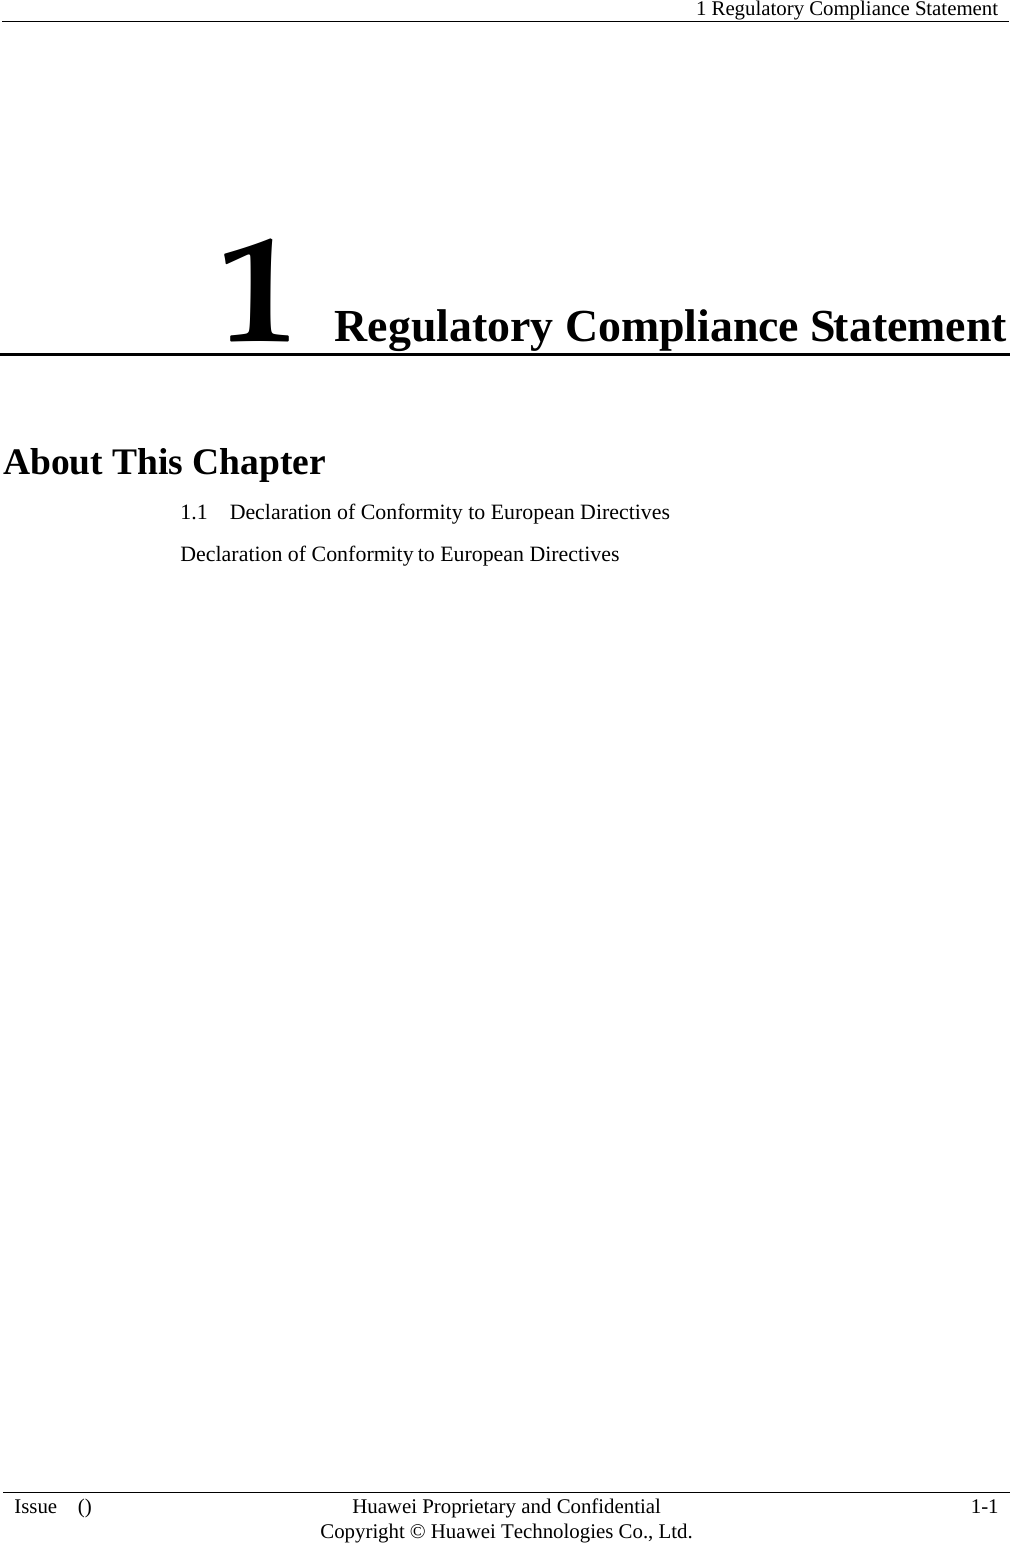   1 Regulatory Compliance Statement   Issue  ()  Huawei Proprietary and Confidential     Copyright © Huawei Technologies Co., Ltd.  1-1  1 Regulatory Compliance Statement About This Chapter 1.1    Declaration of Conformity to European Directives Declaration of Conformity to European Directives 